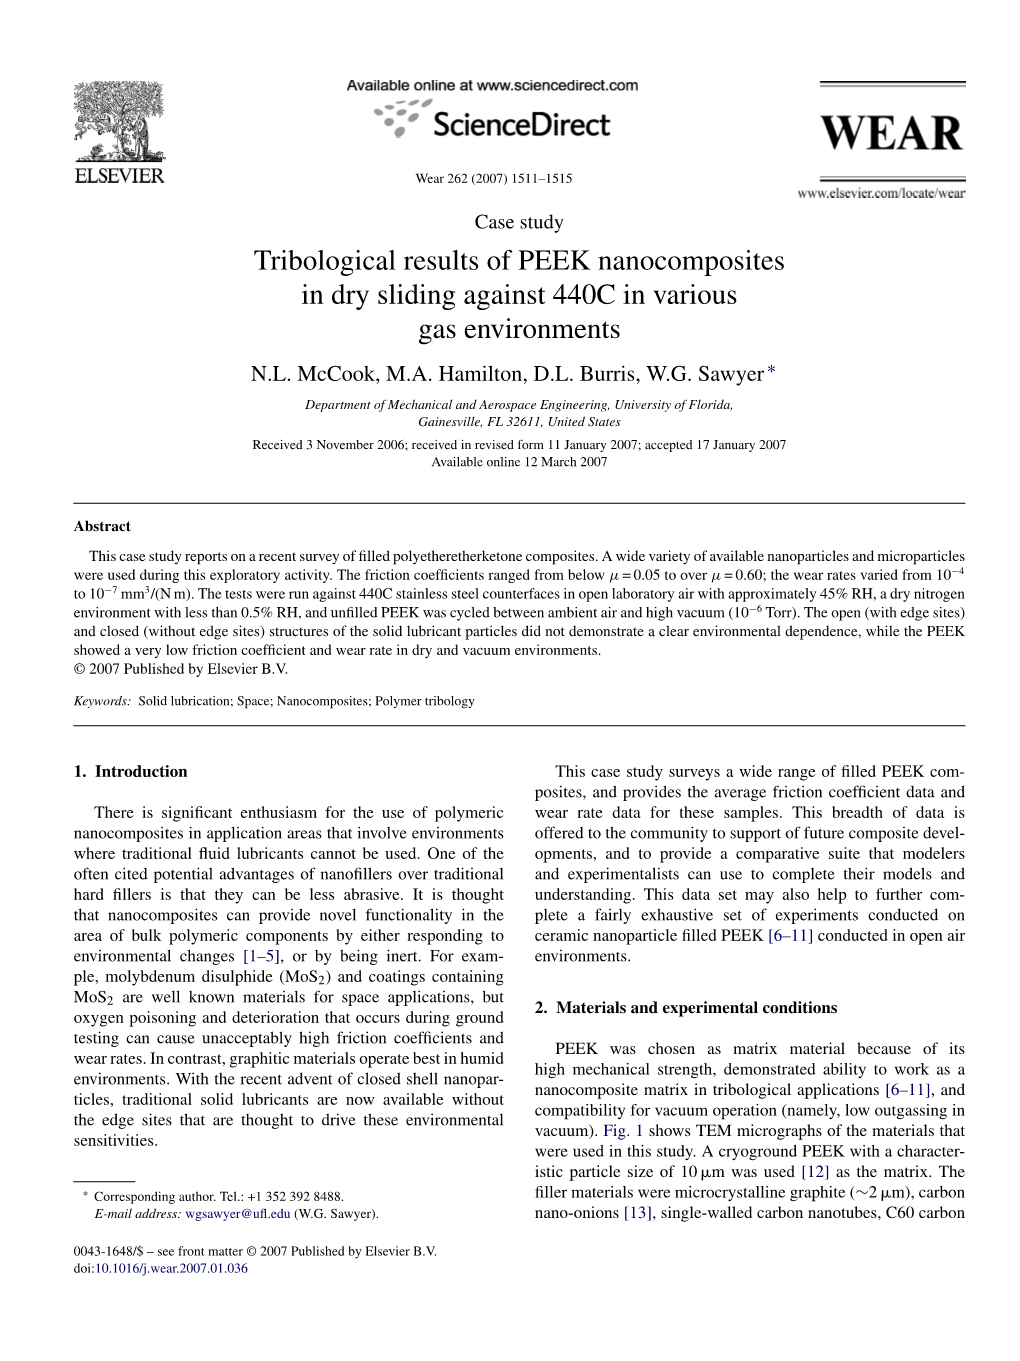 Tribological Results of PEEK Nanocomposites in Dry Sliding Against 440C in Various Gas Environments N.L